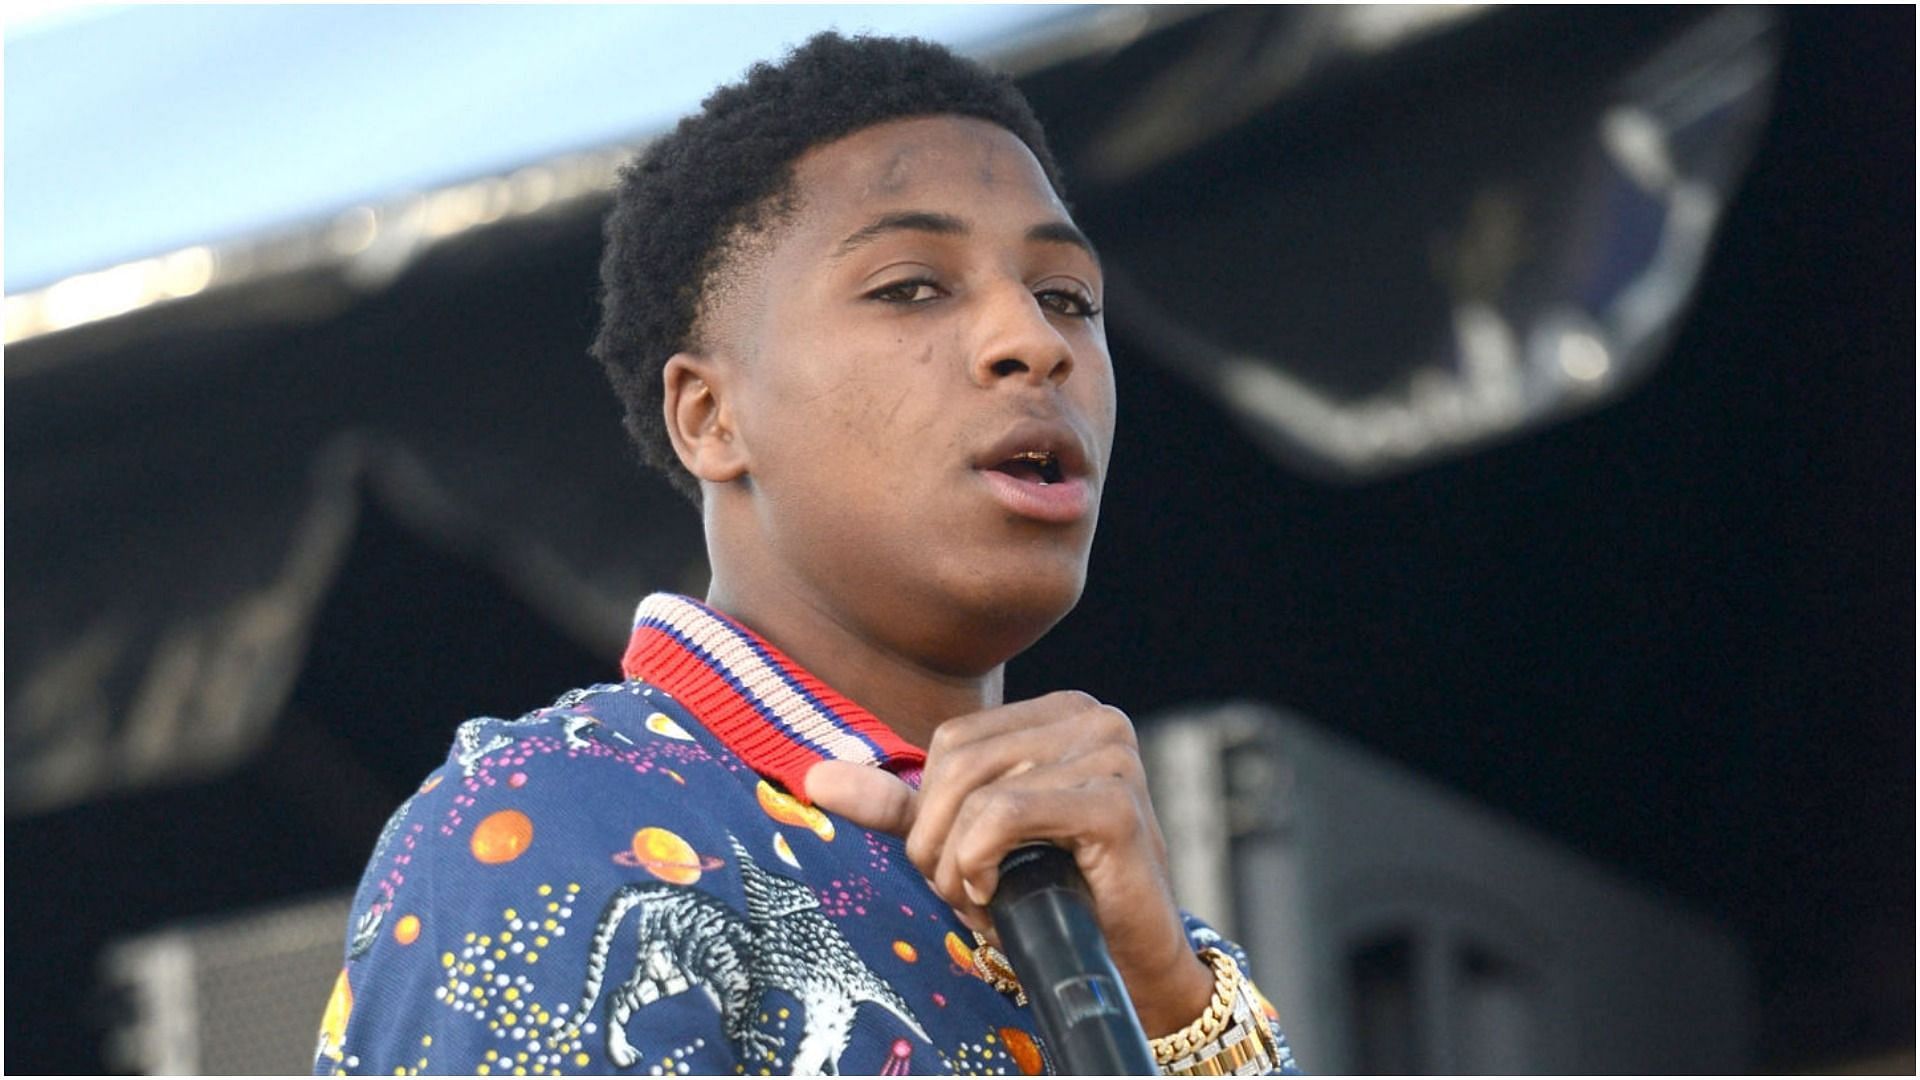 NBA Youngboy's kids: how many children does the rapper have